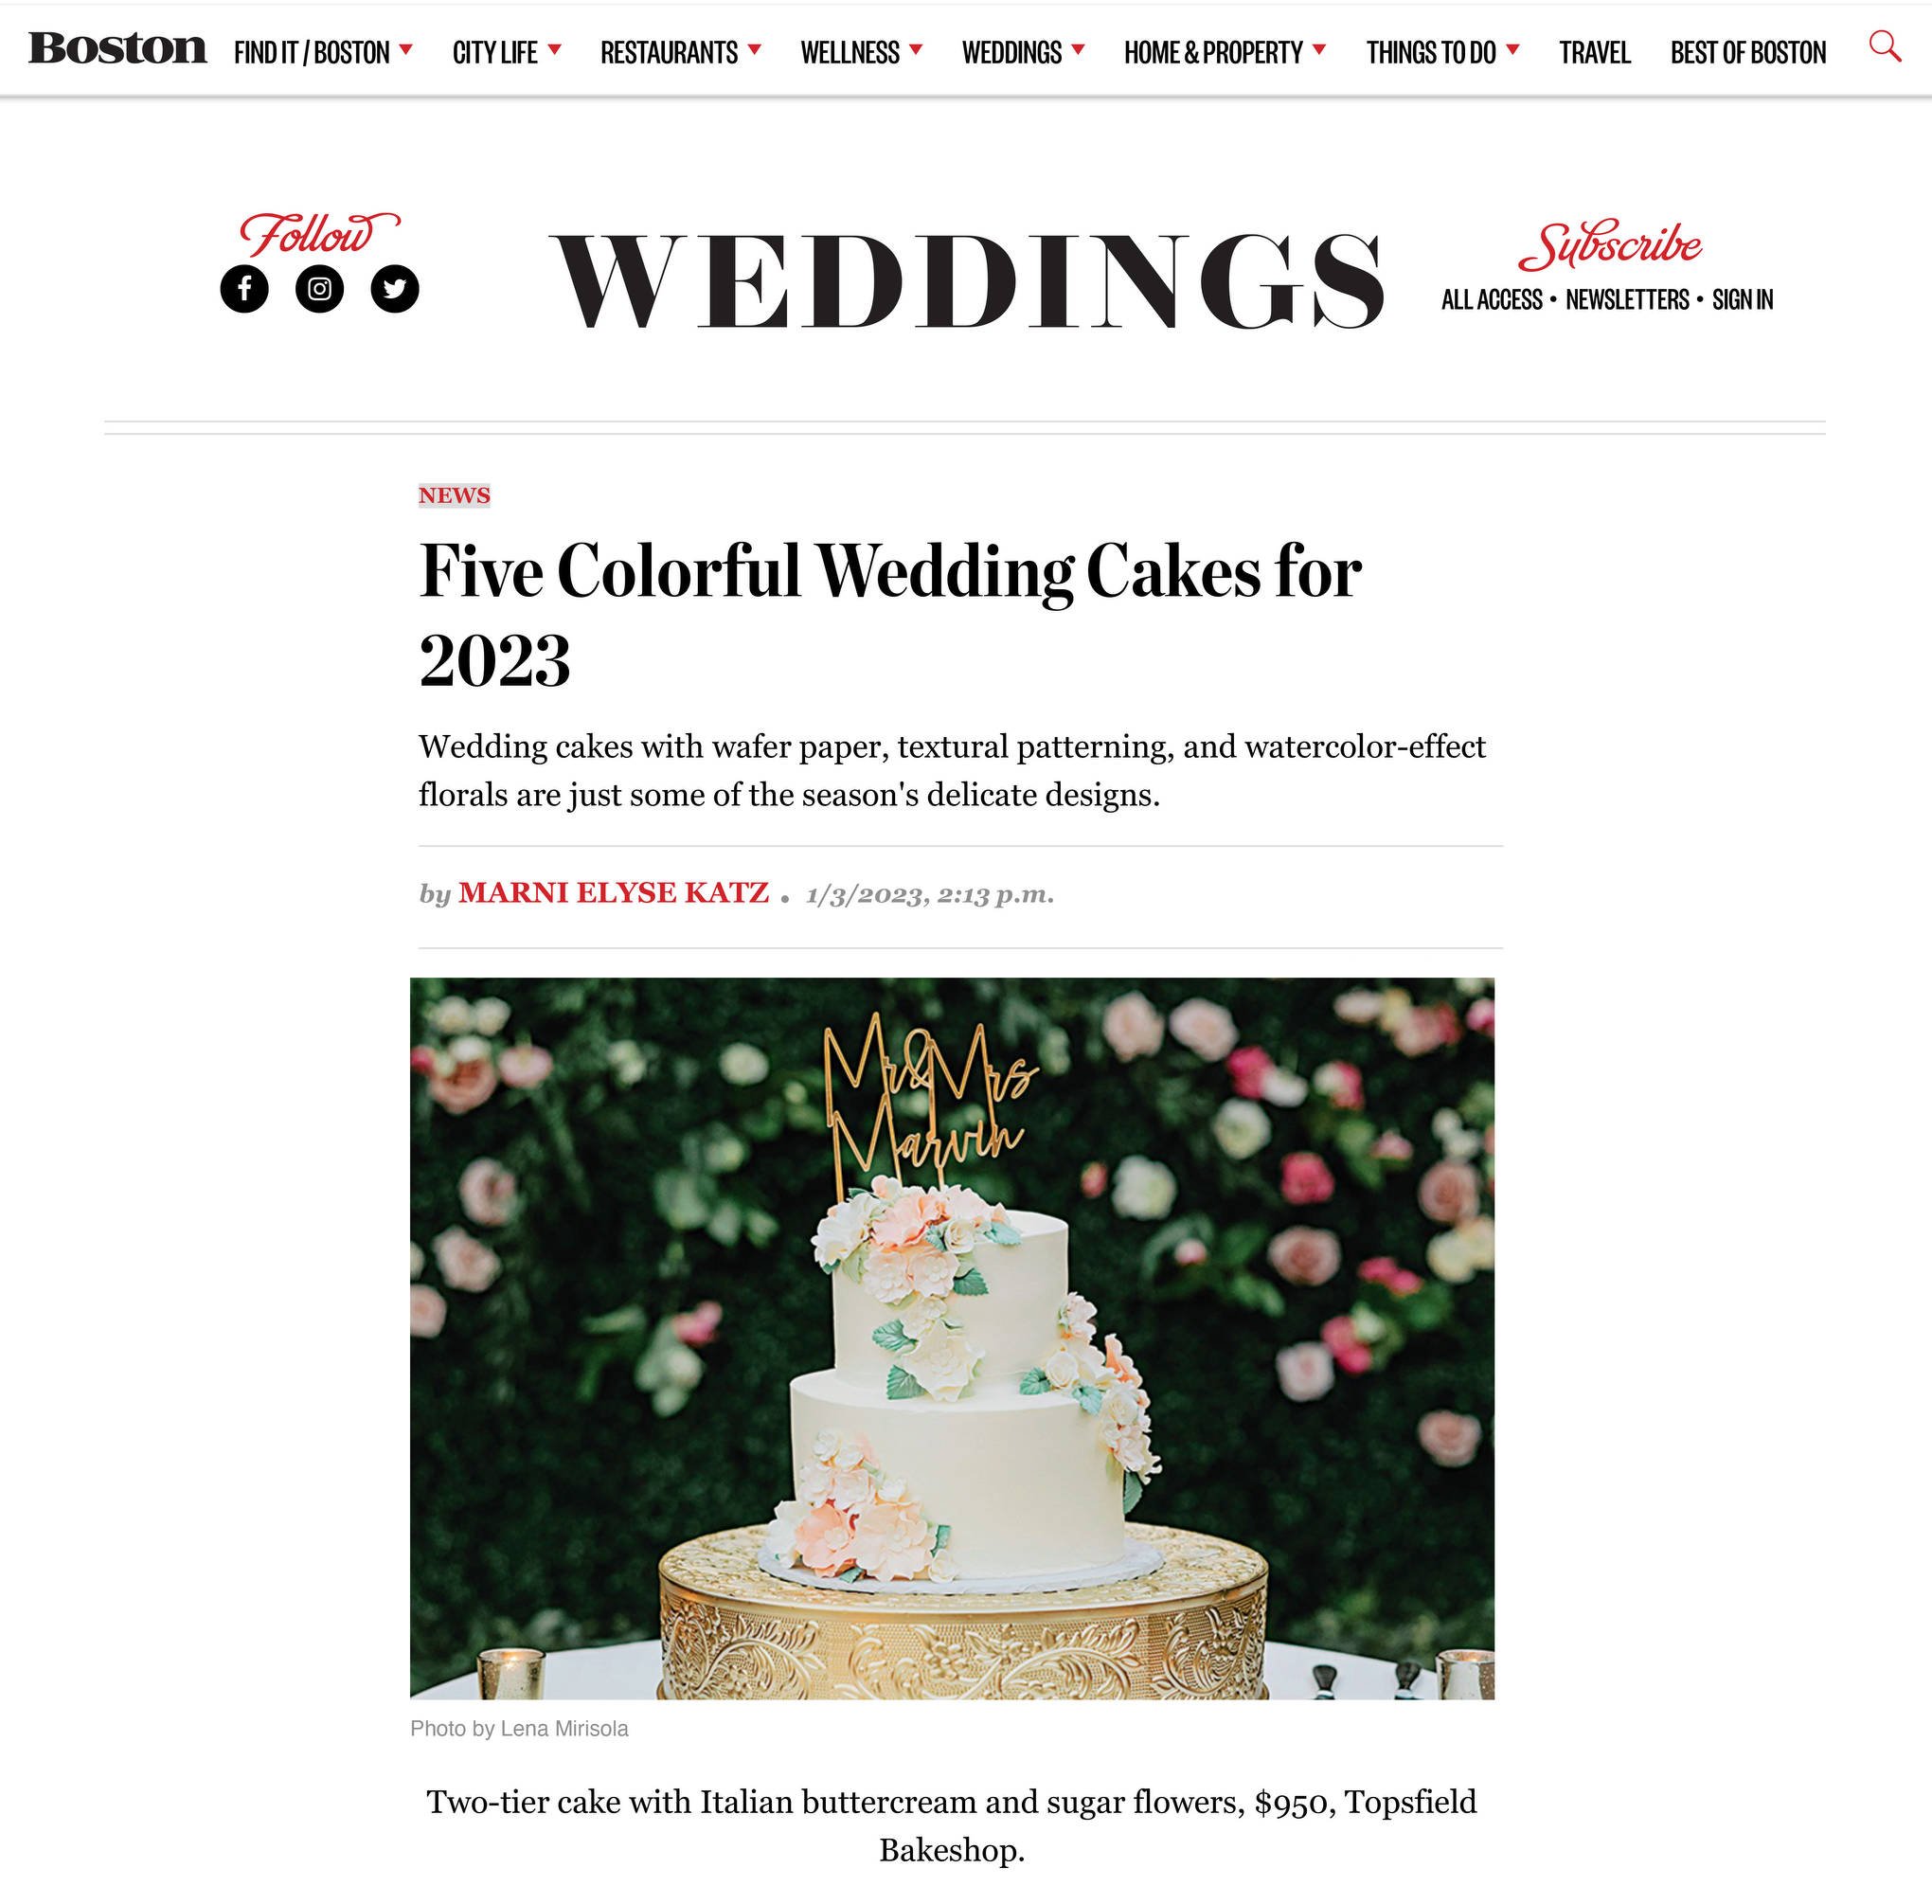 Five Colorful Wedding Cakes for 2023.JPG